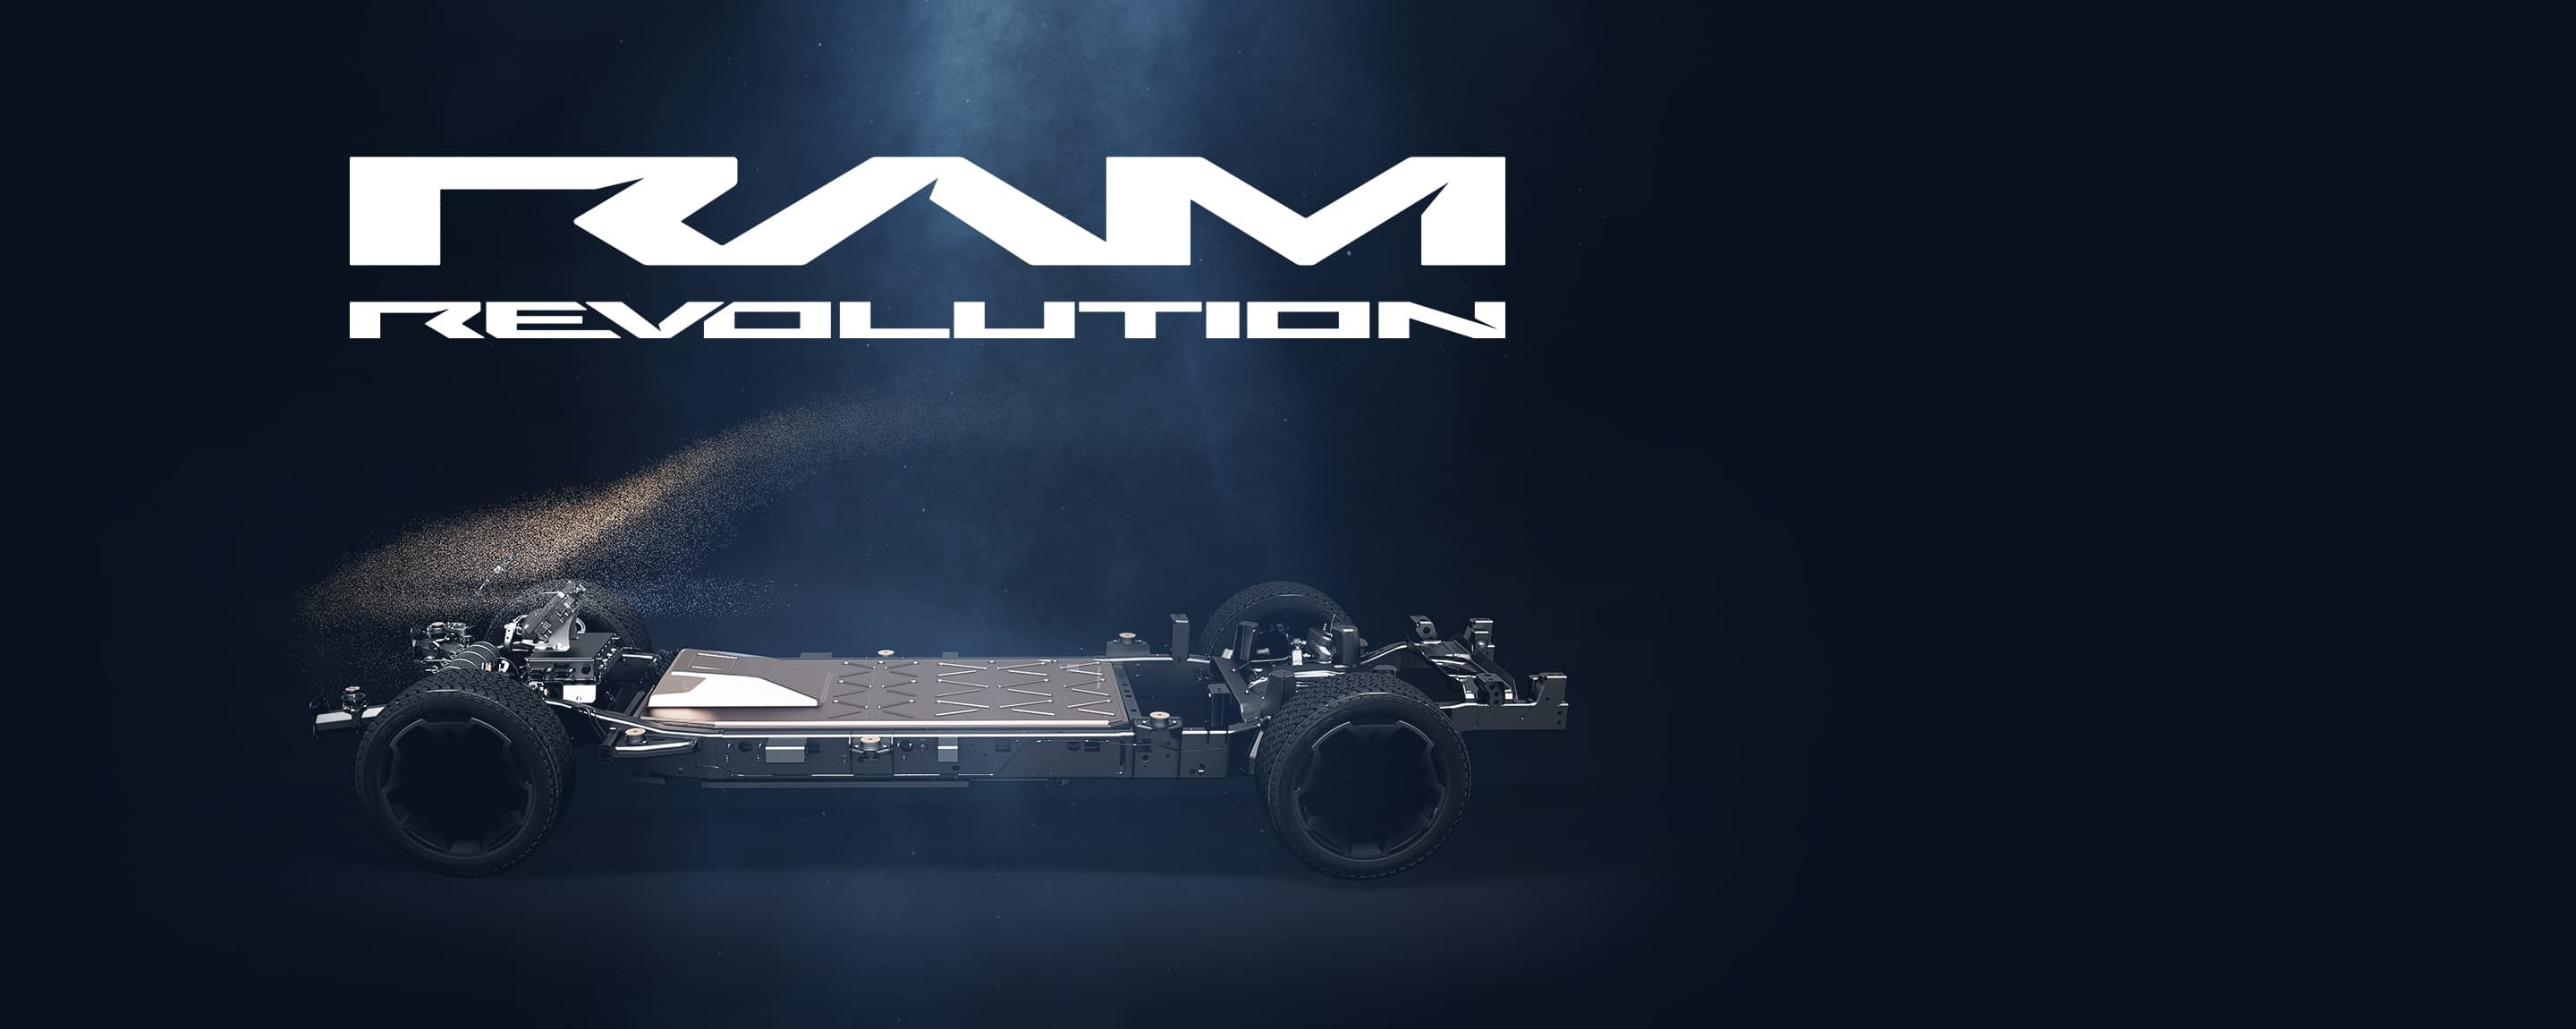 The Ram Revolution logo and an illustrated chassis.